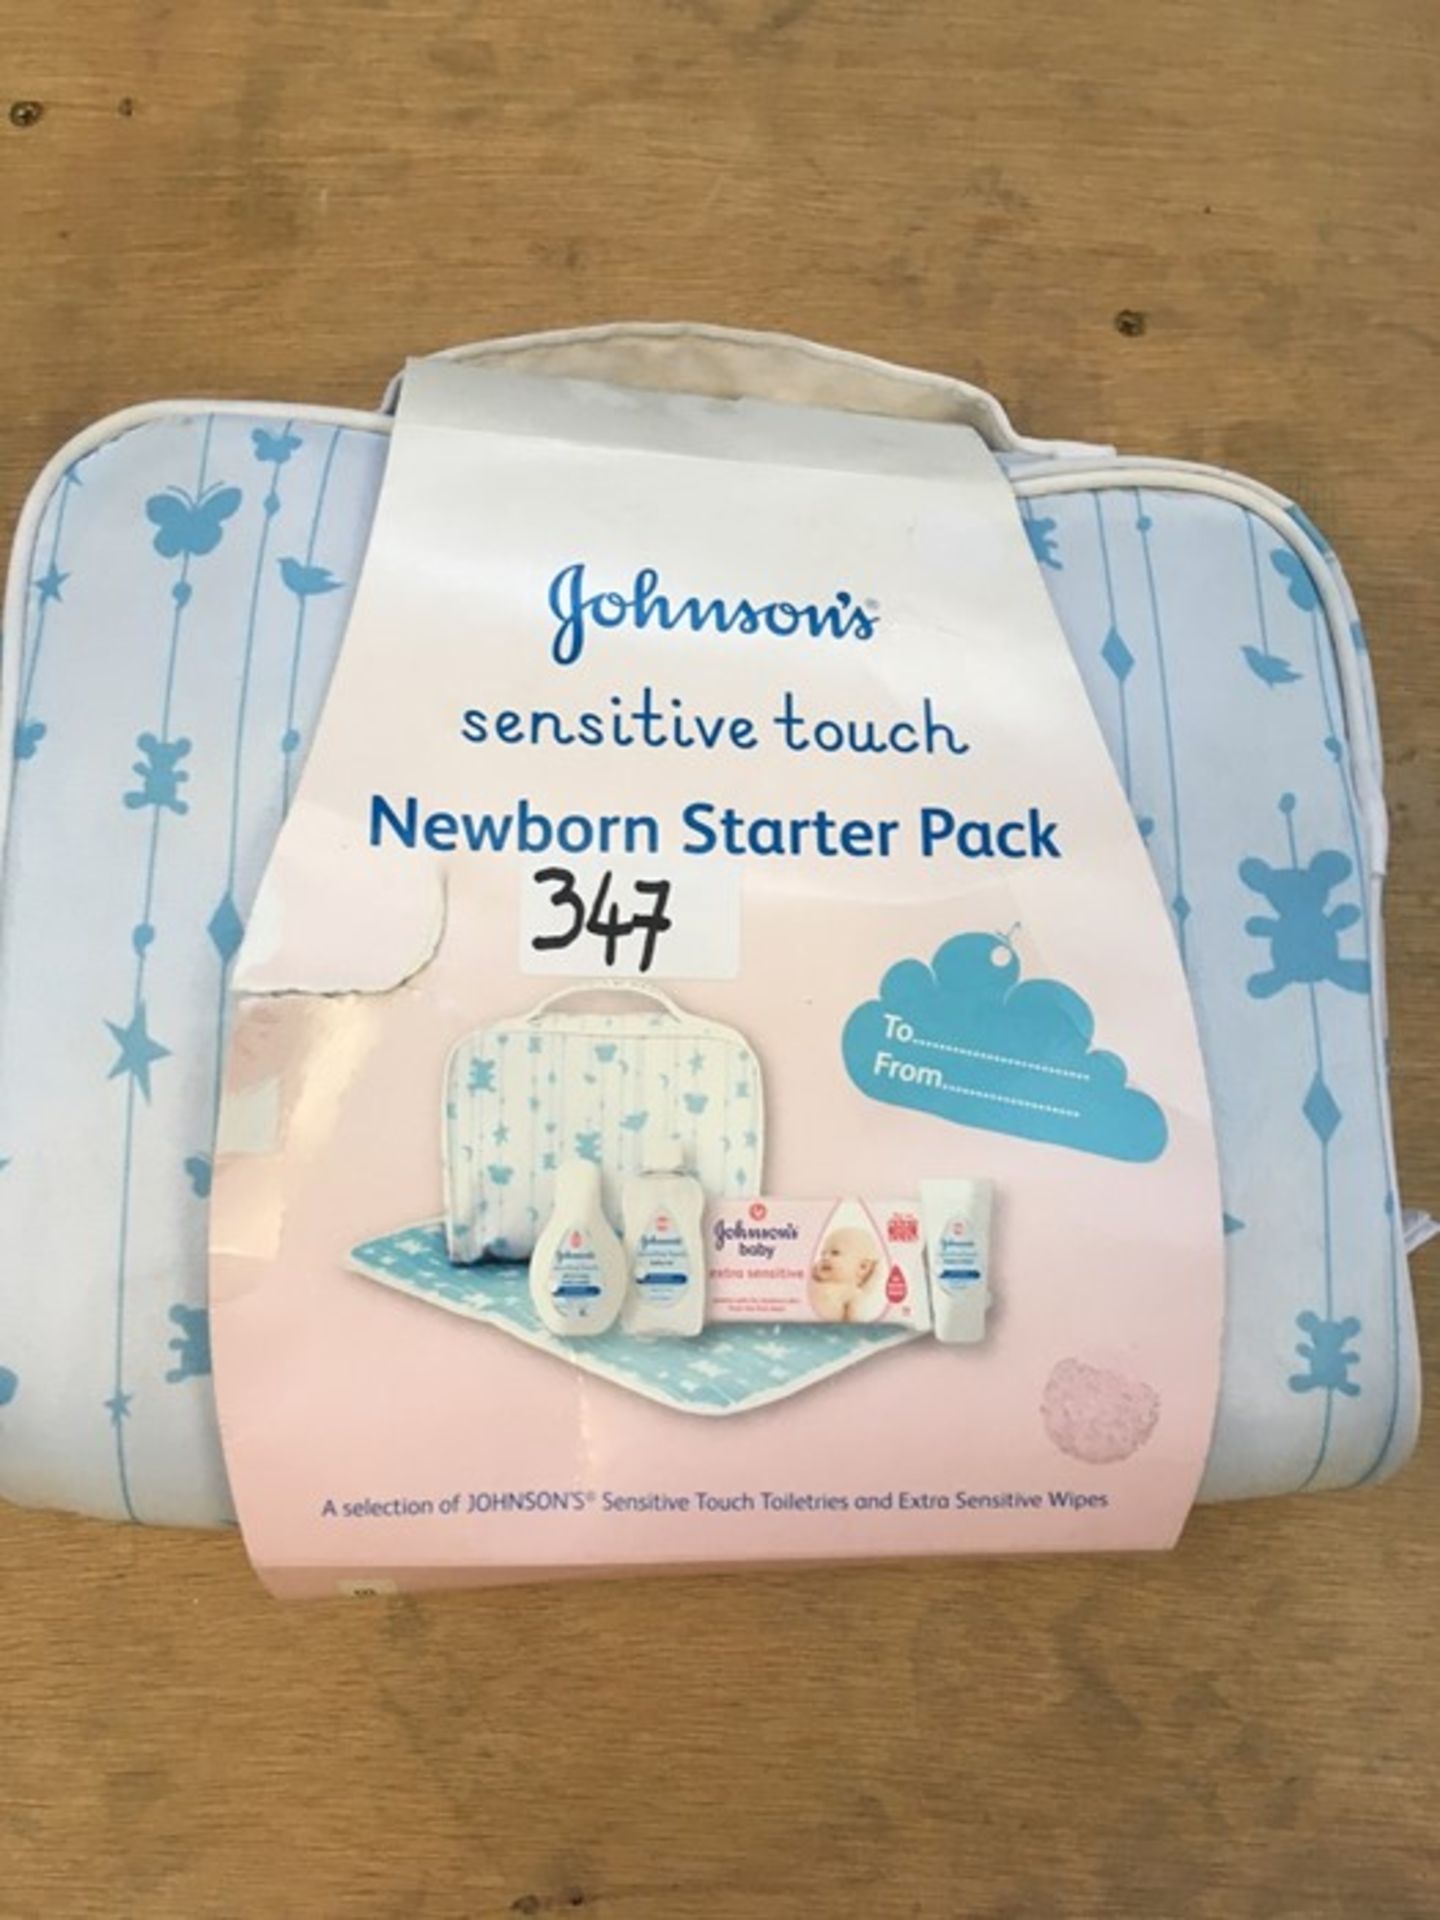 1 JOHNSONS SENSITIVE TOUCH NEWBORN STARTER PACK (PUBLIC VIEWING AVAILABLE)